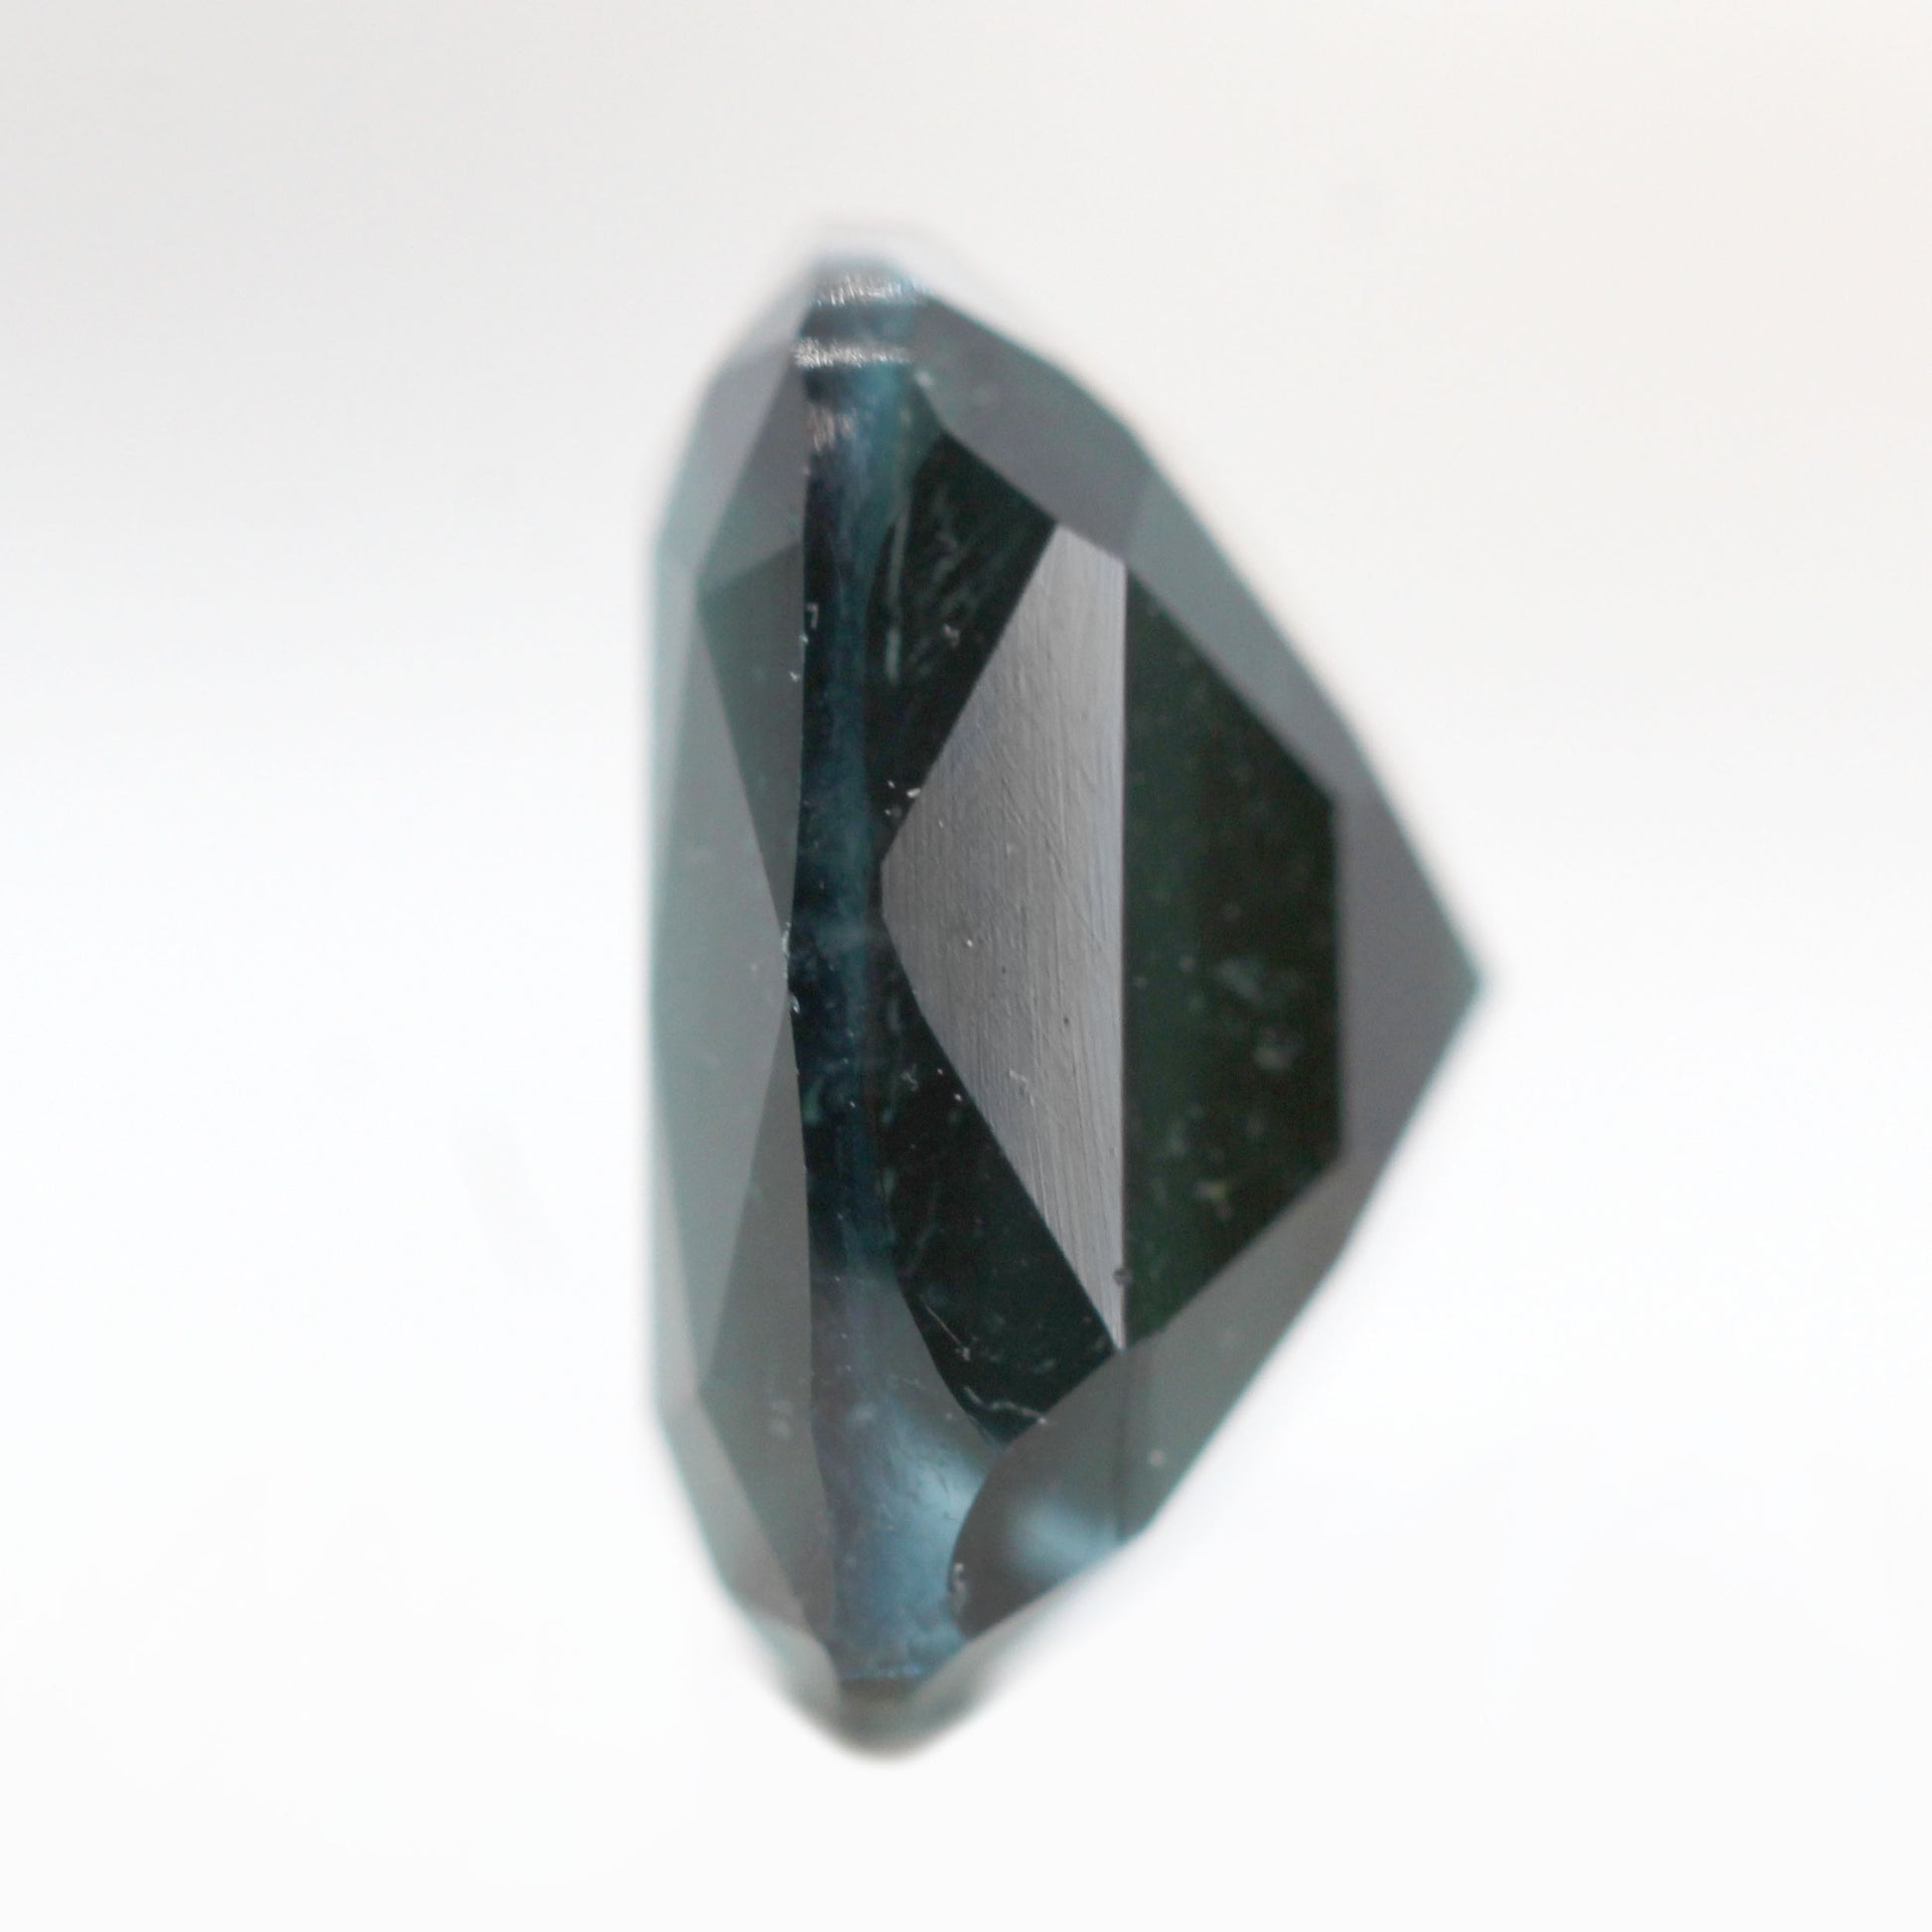 3.85 Carat Cushion Cut Indicolite Blue Tourmaline for Custom Work - Inventory Code TCT385 - Midwinter Co. Alternative Bridal Rings and Modern Fine Jewelry